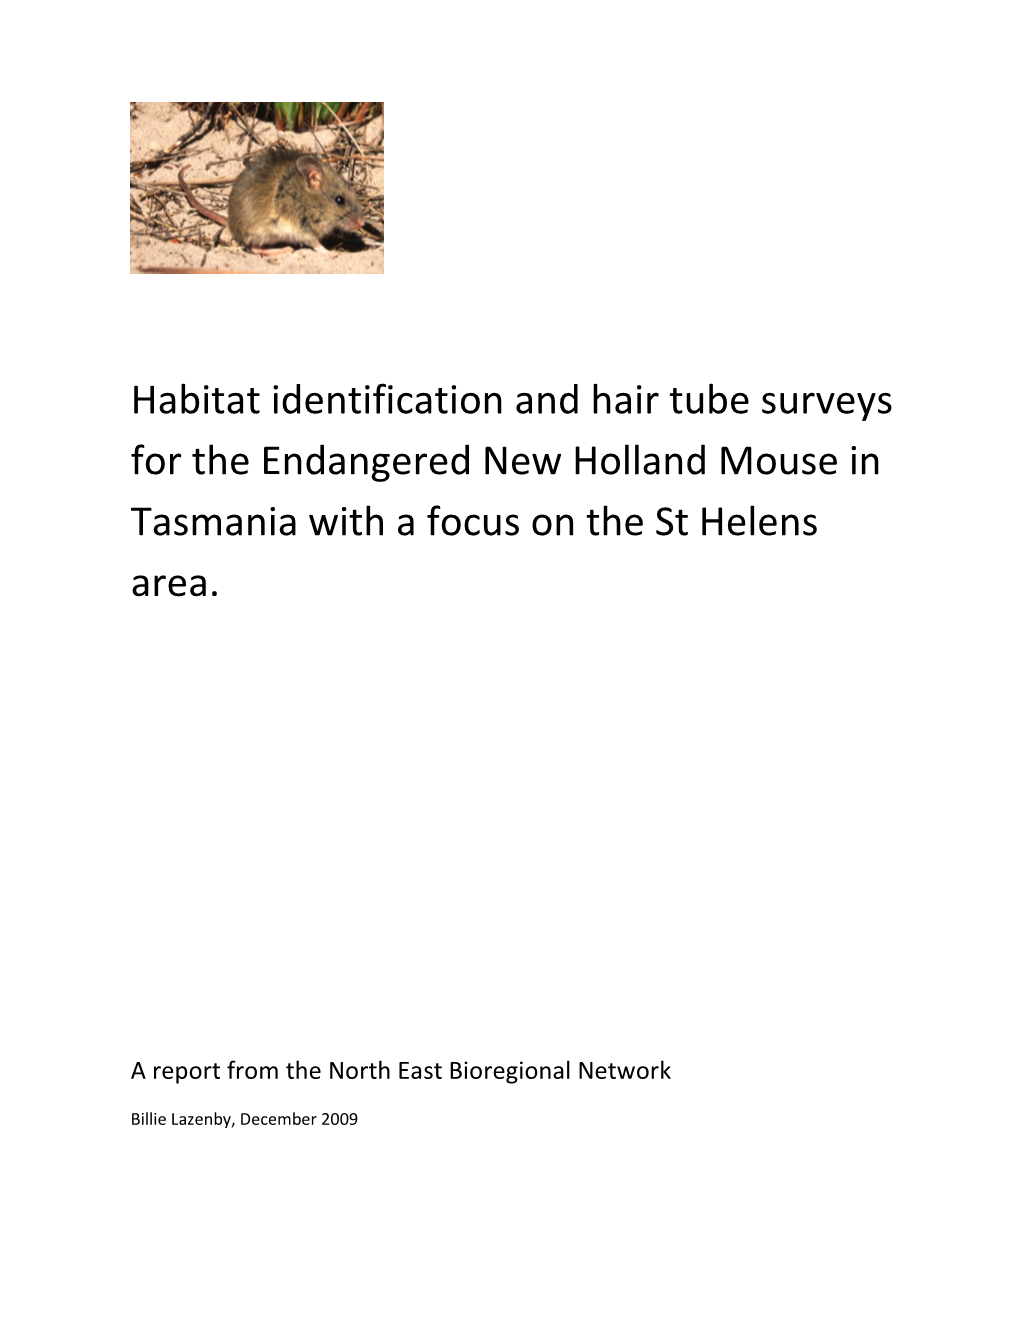 Habitat Identification and Hair Tube Surveys for the Endangered New Holland Mouse in Tasmania with a Focus on the St Helens Area